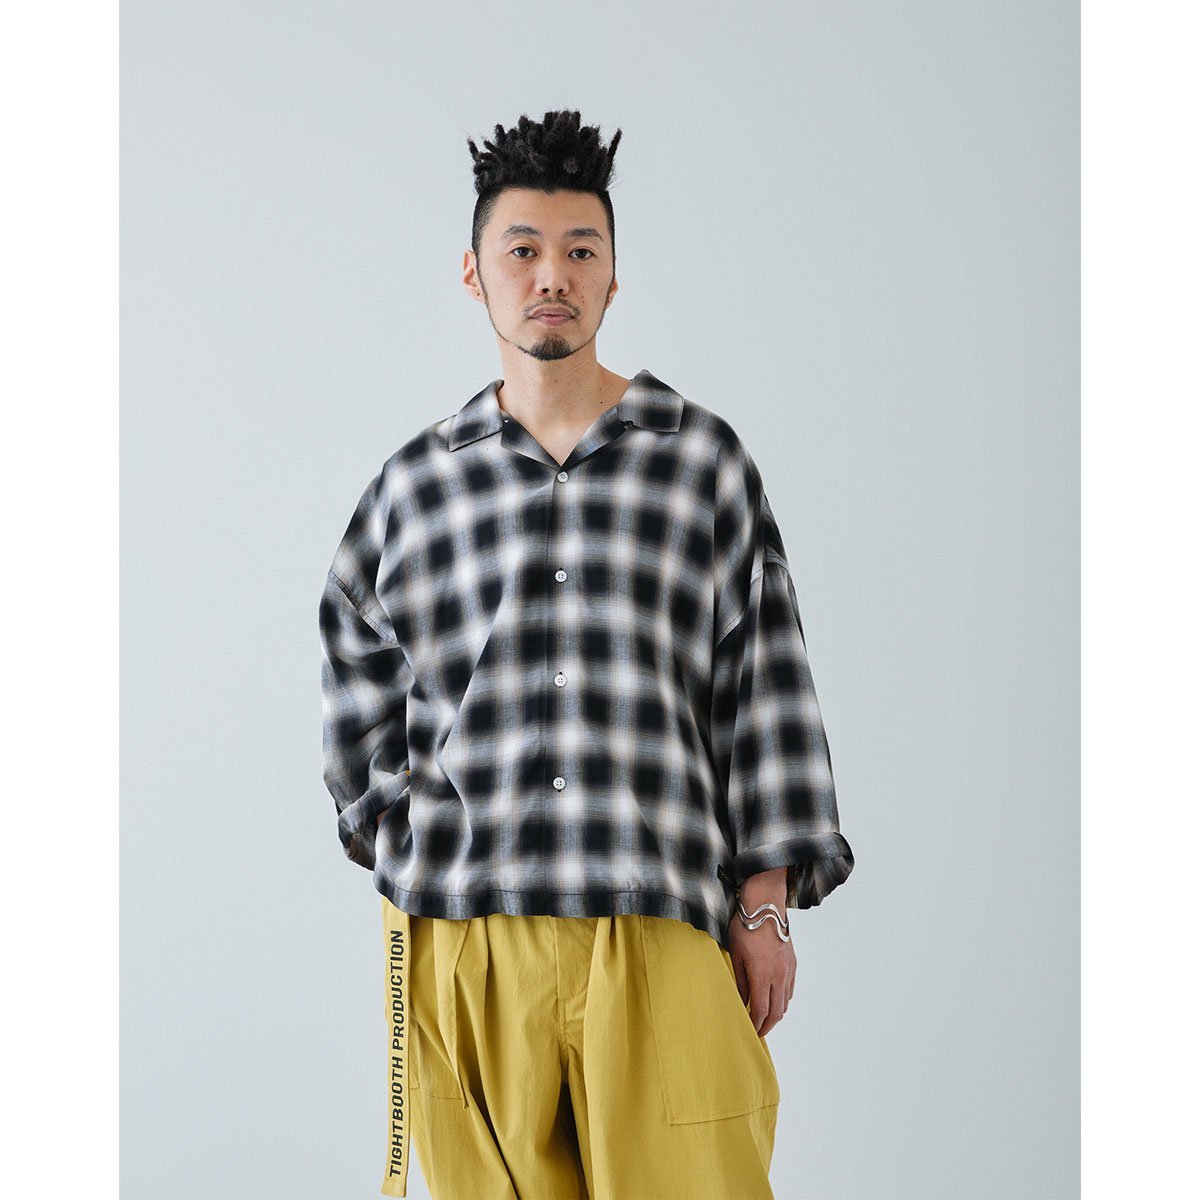 L TIGHTBOOTH 21ss OMBRE ROLL UP SHIRT